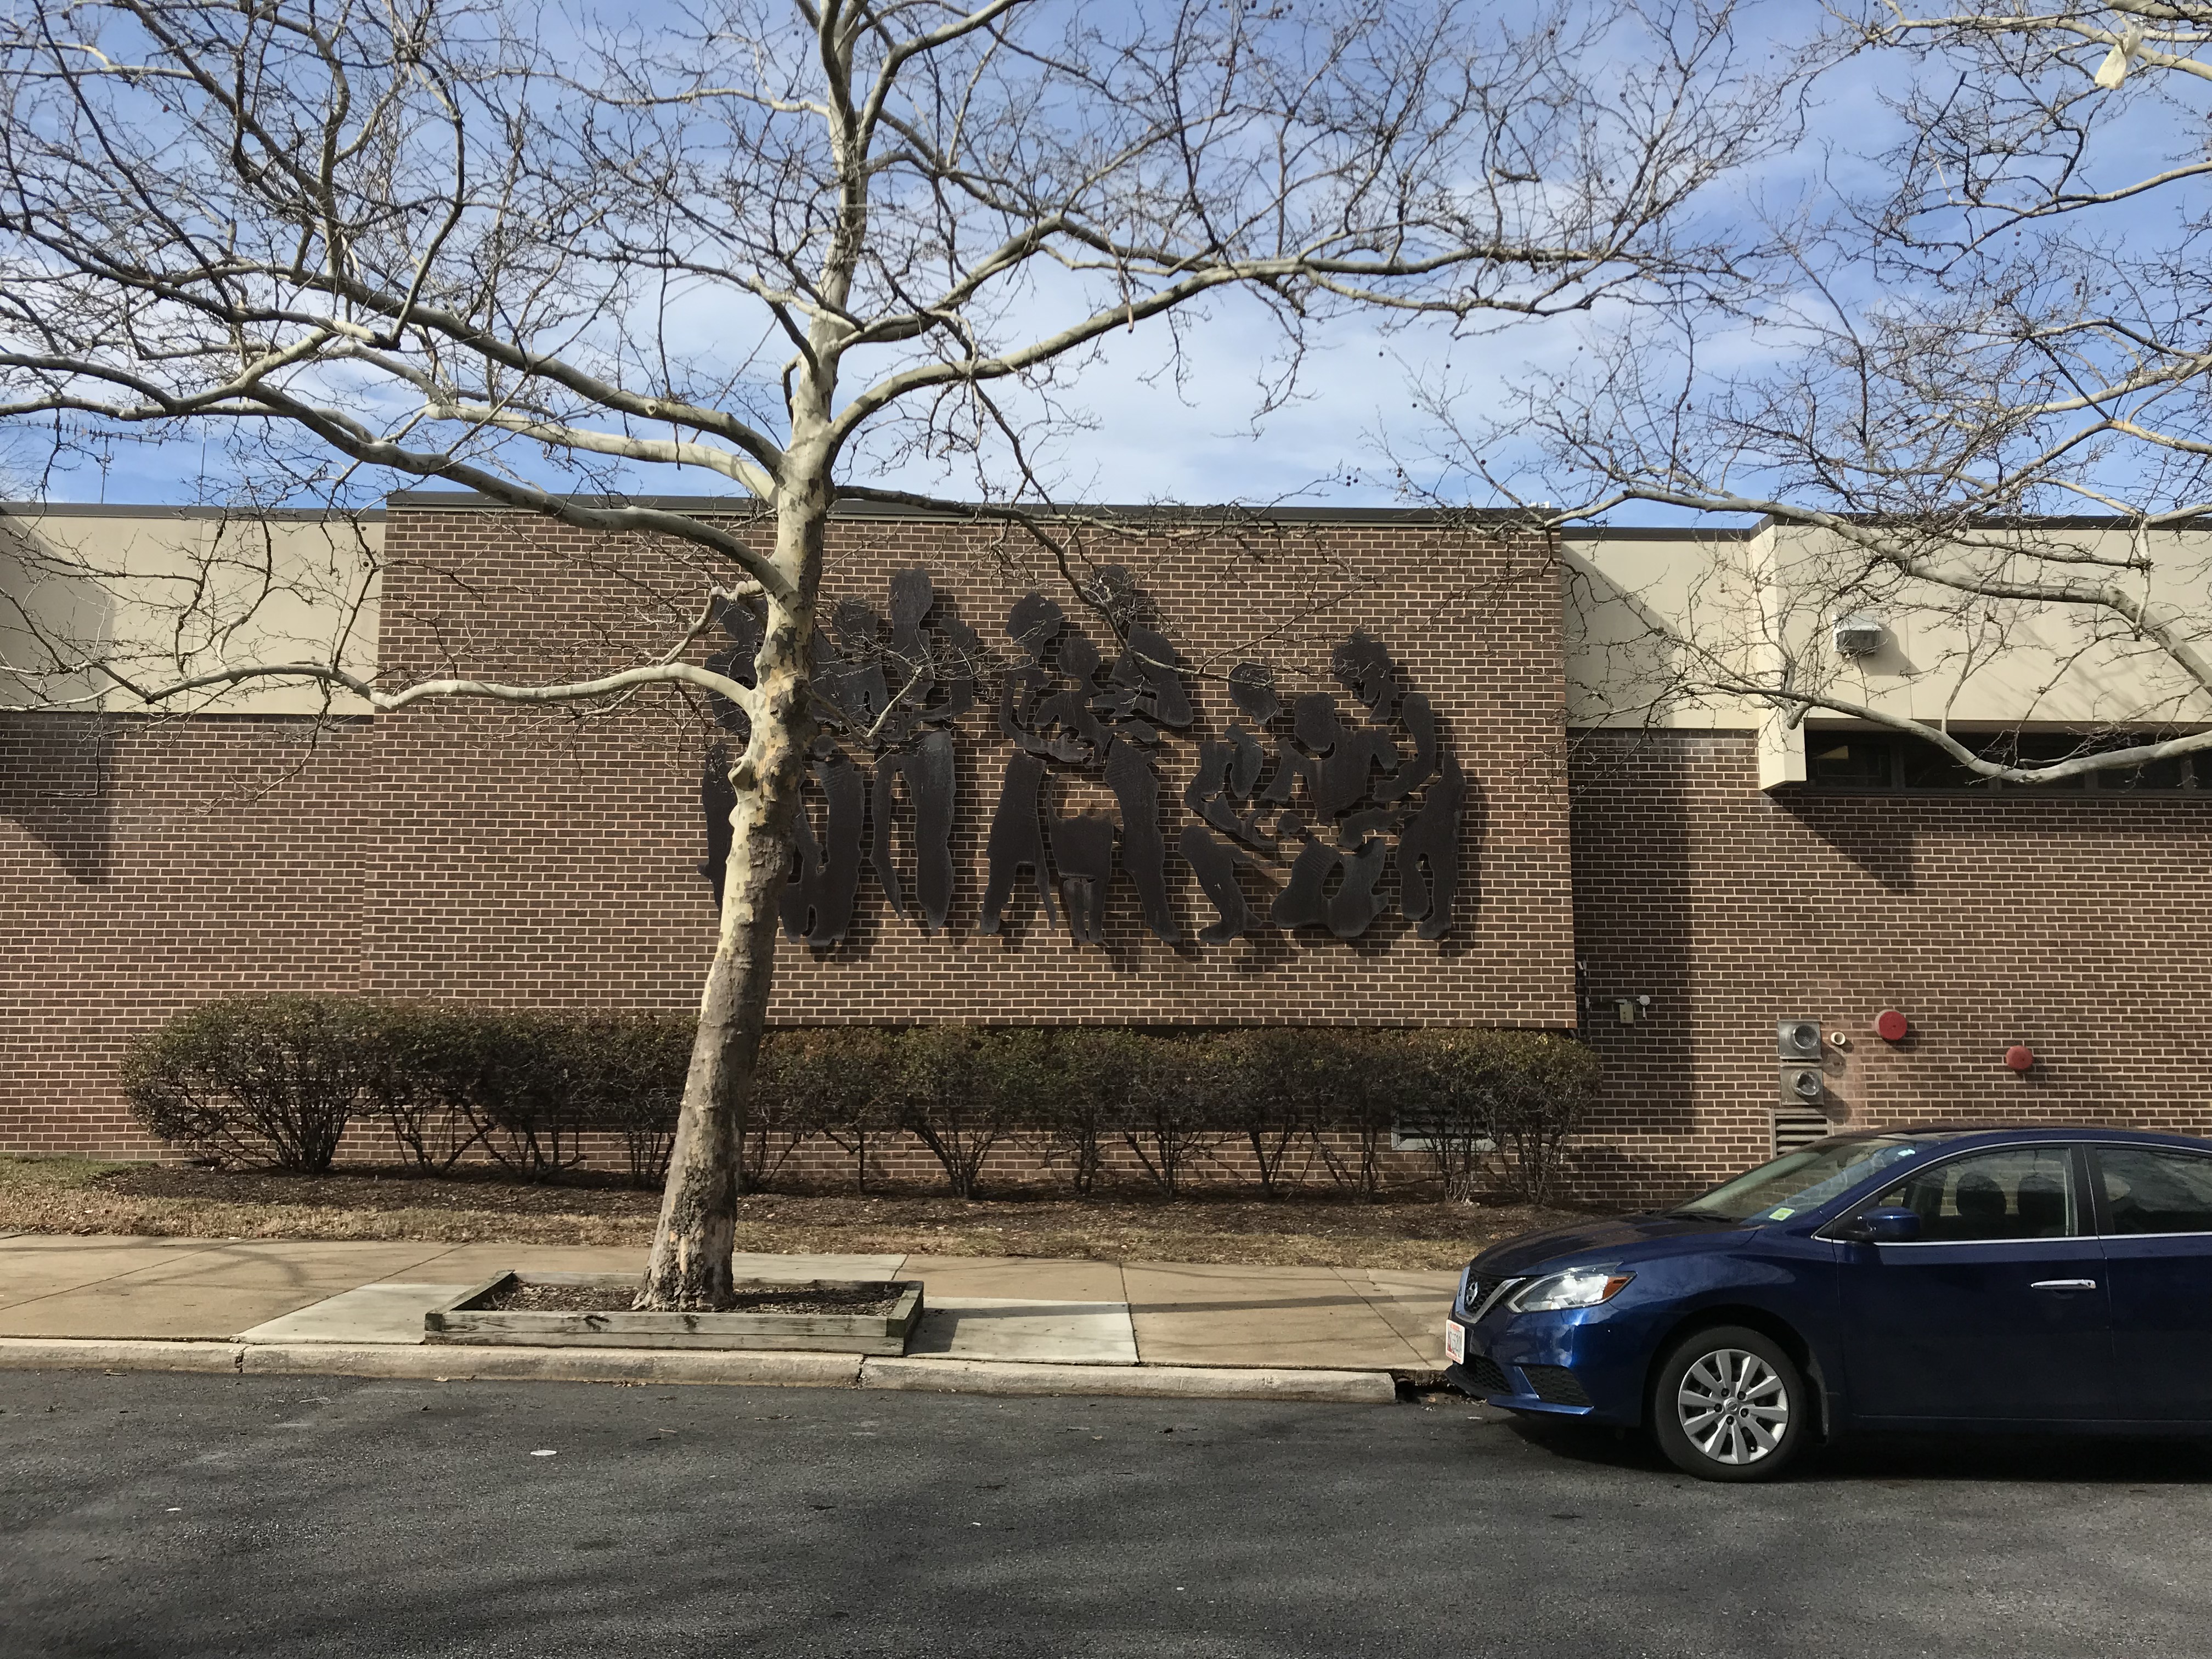 Modern wall sculpture, Total Health Care, Inc./Larry Young Division Health Center, 1501 Division Street, Baltimore, MD 21217, Baltimore, Building, Car, Clinic, HQ Photo